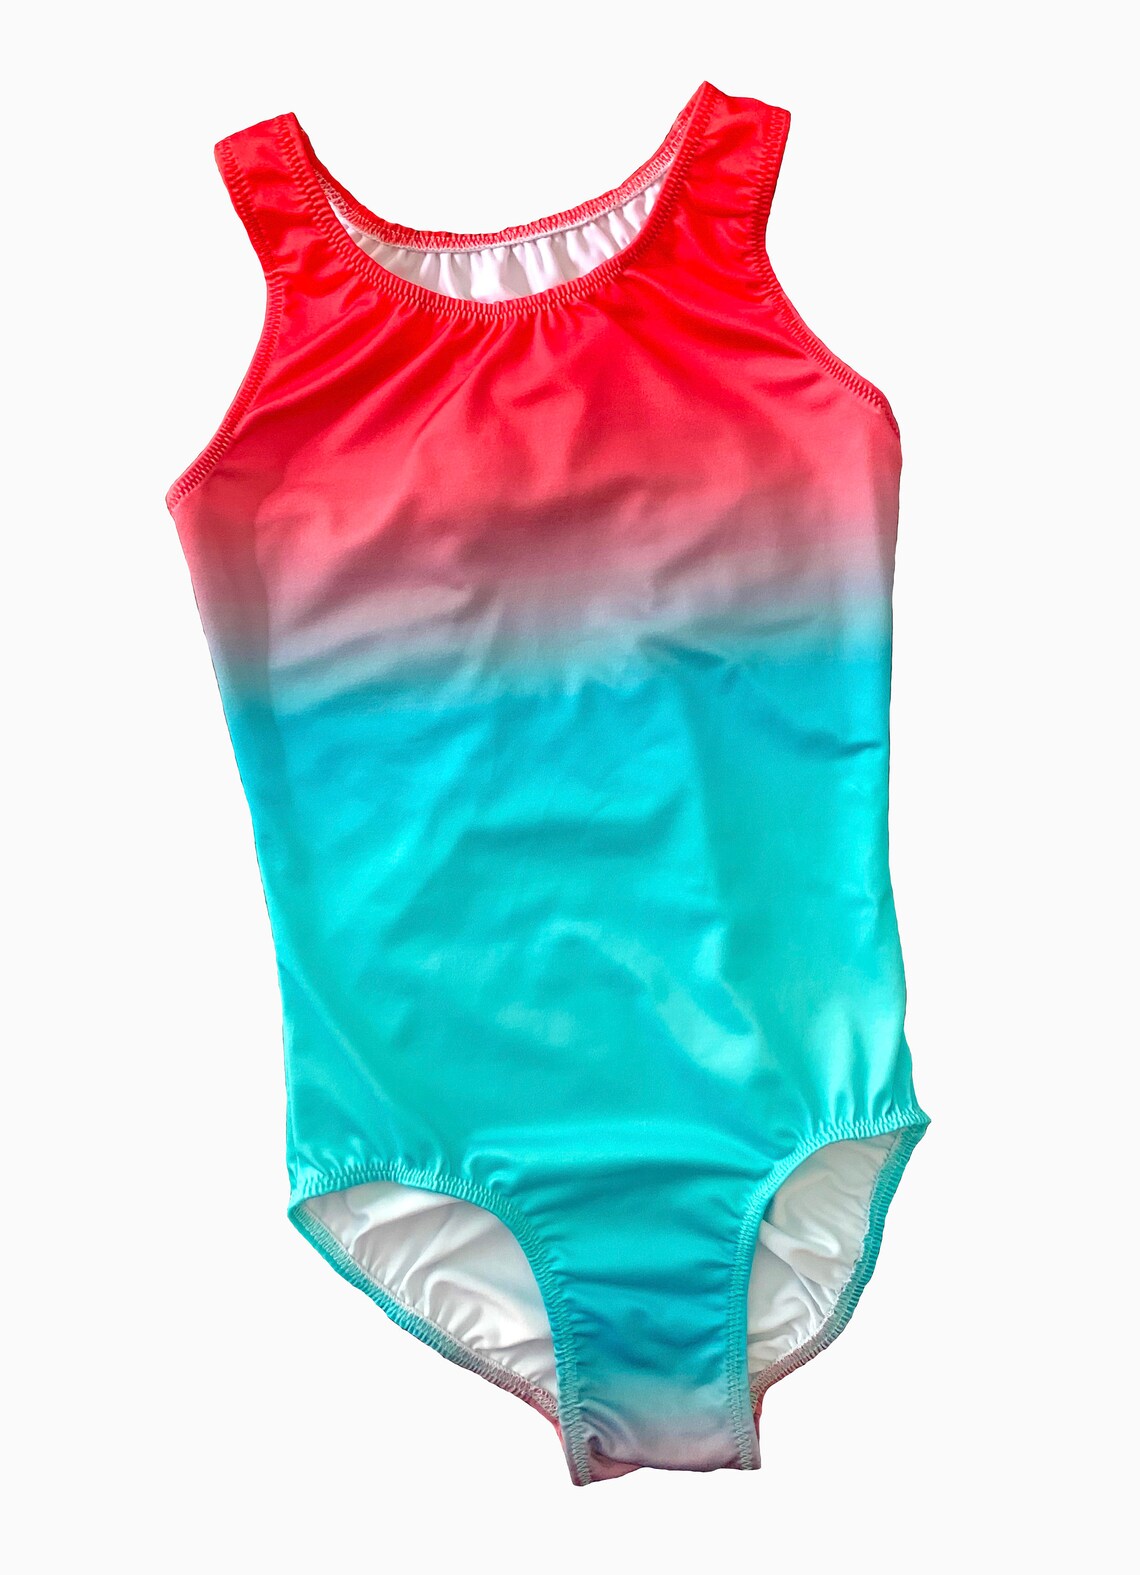 Red Turquoise Ombre Girls Gymnastics Leotard - Etsy